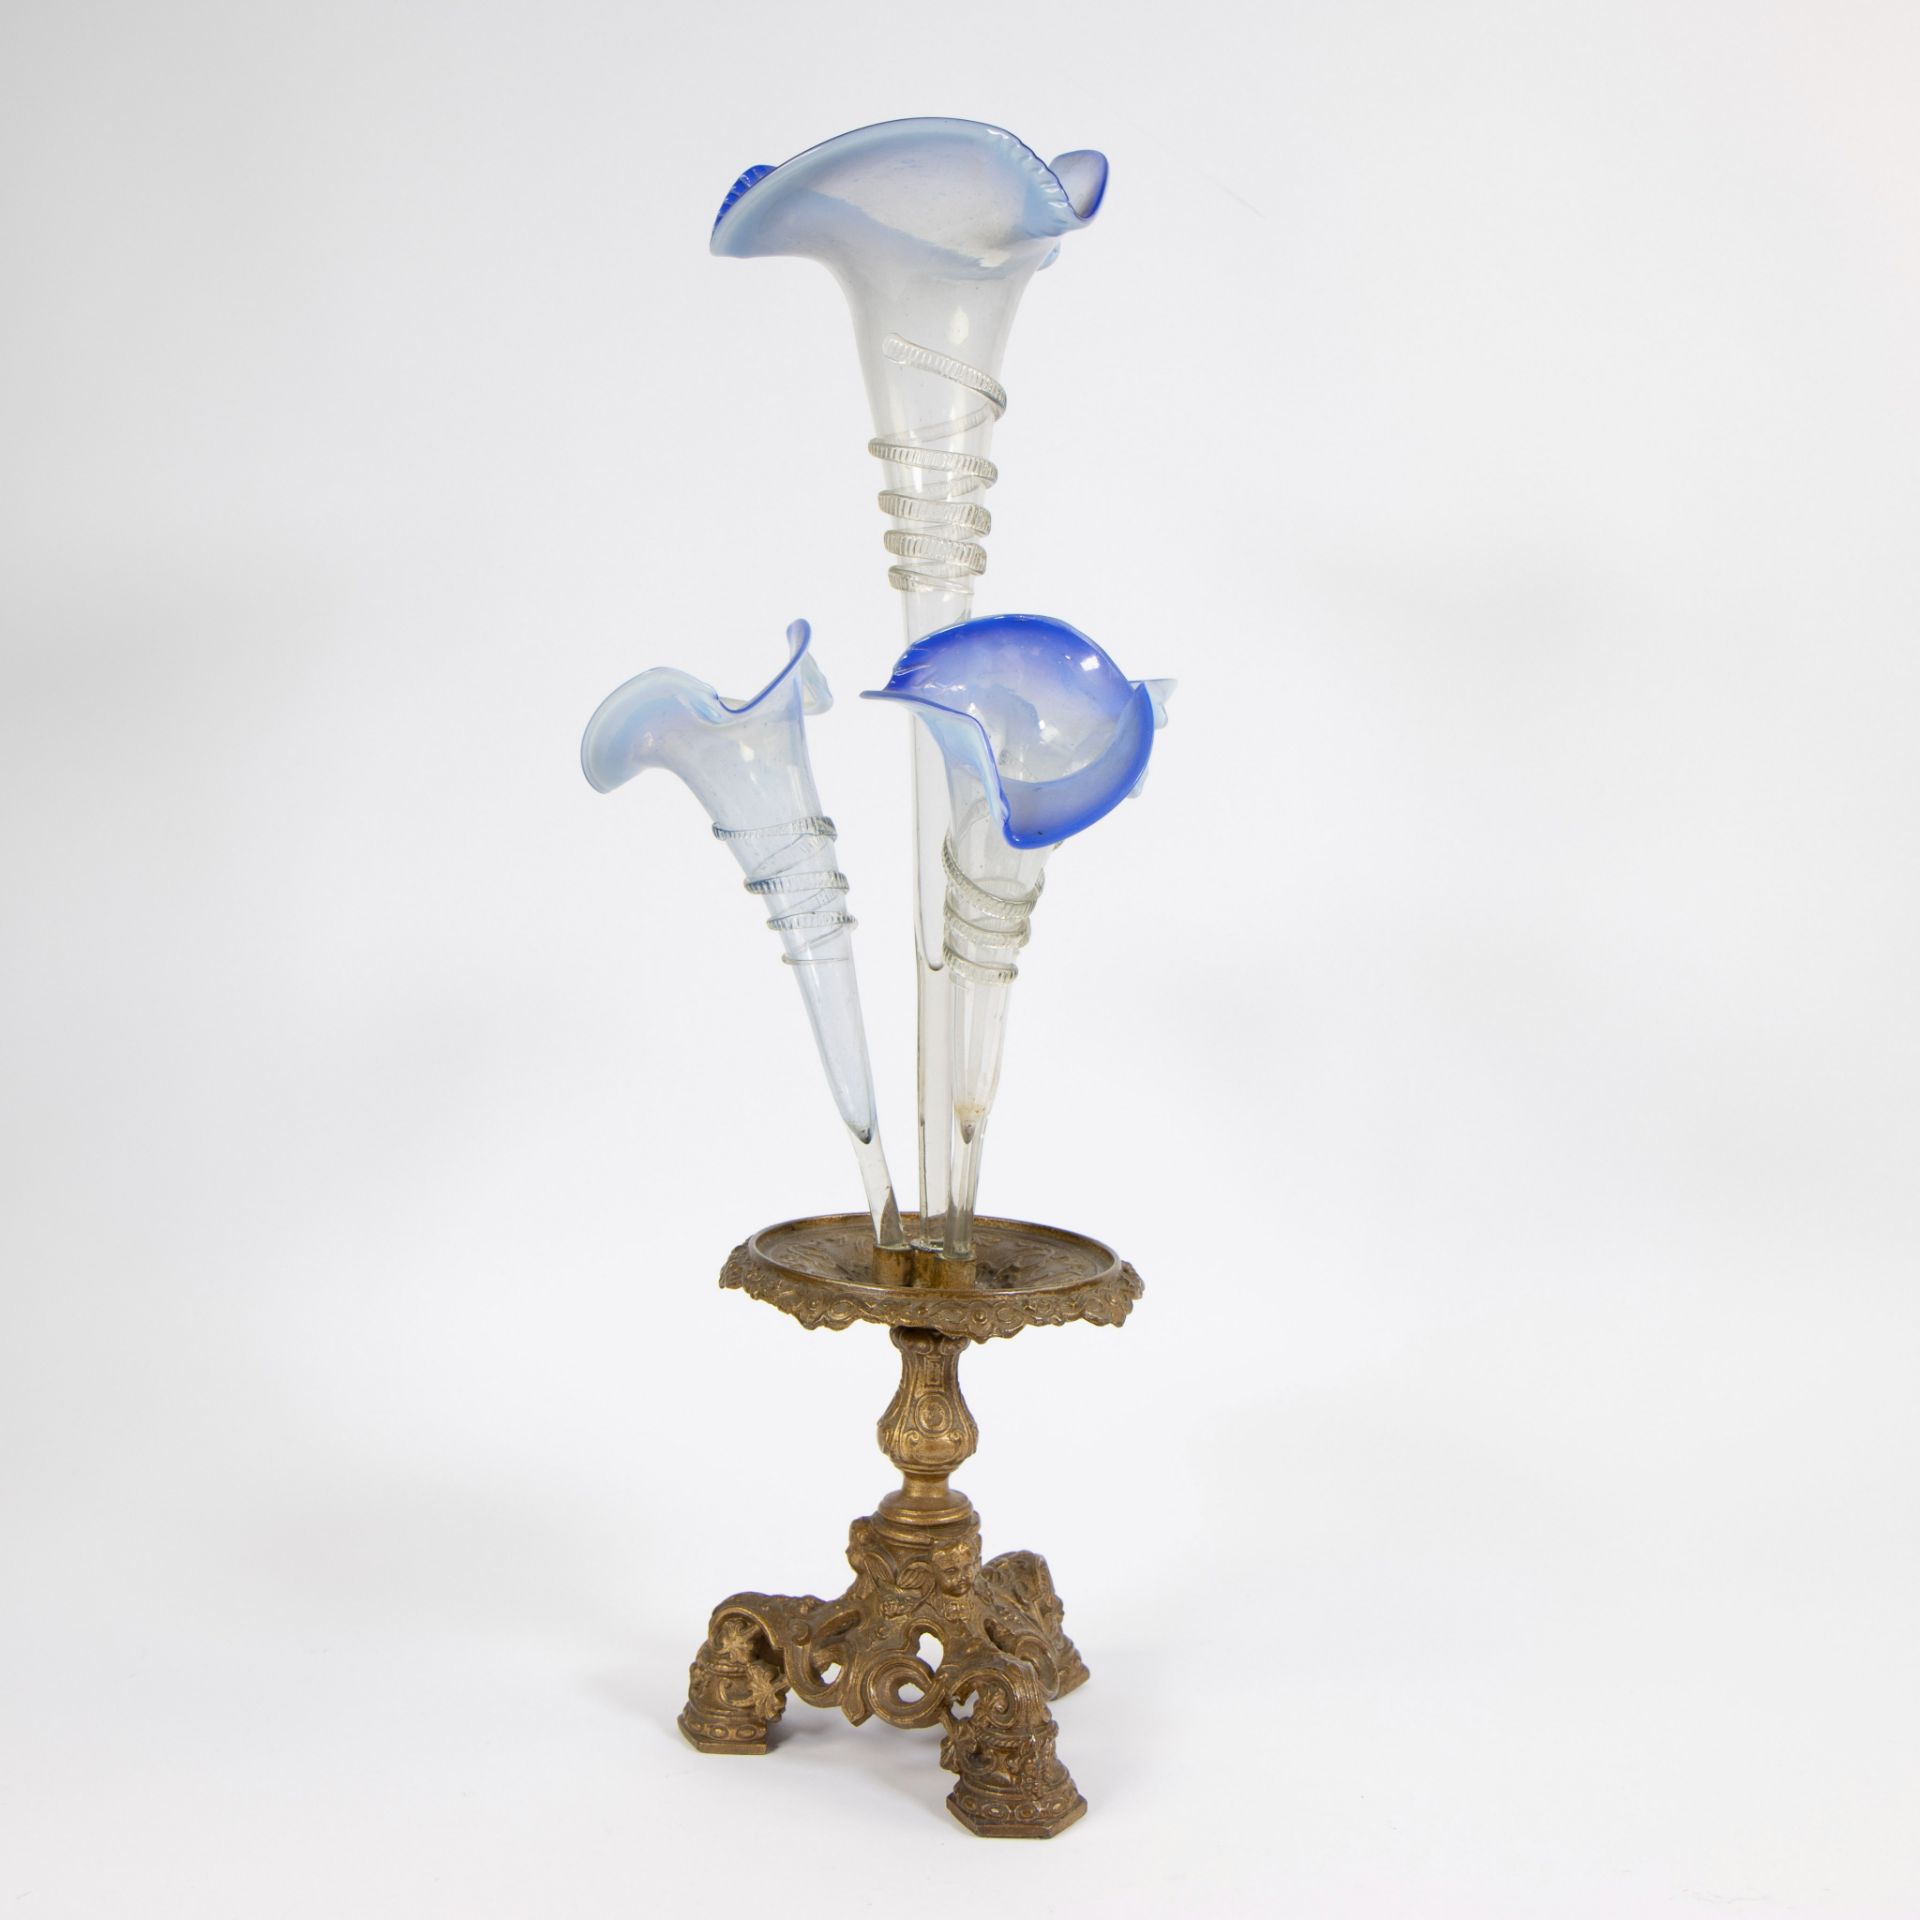 Metal base with soliflore vases in Venetian glass + glass walking stick, circa 1900 - Image 5 of 6